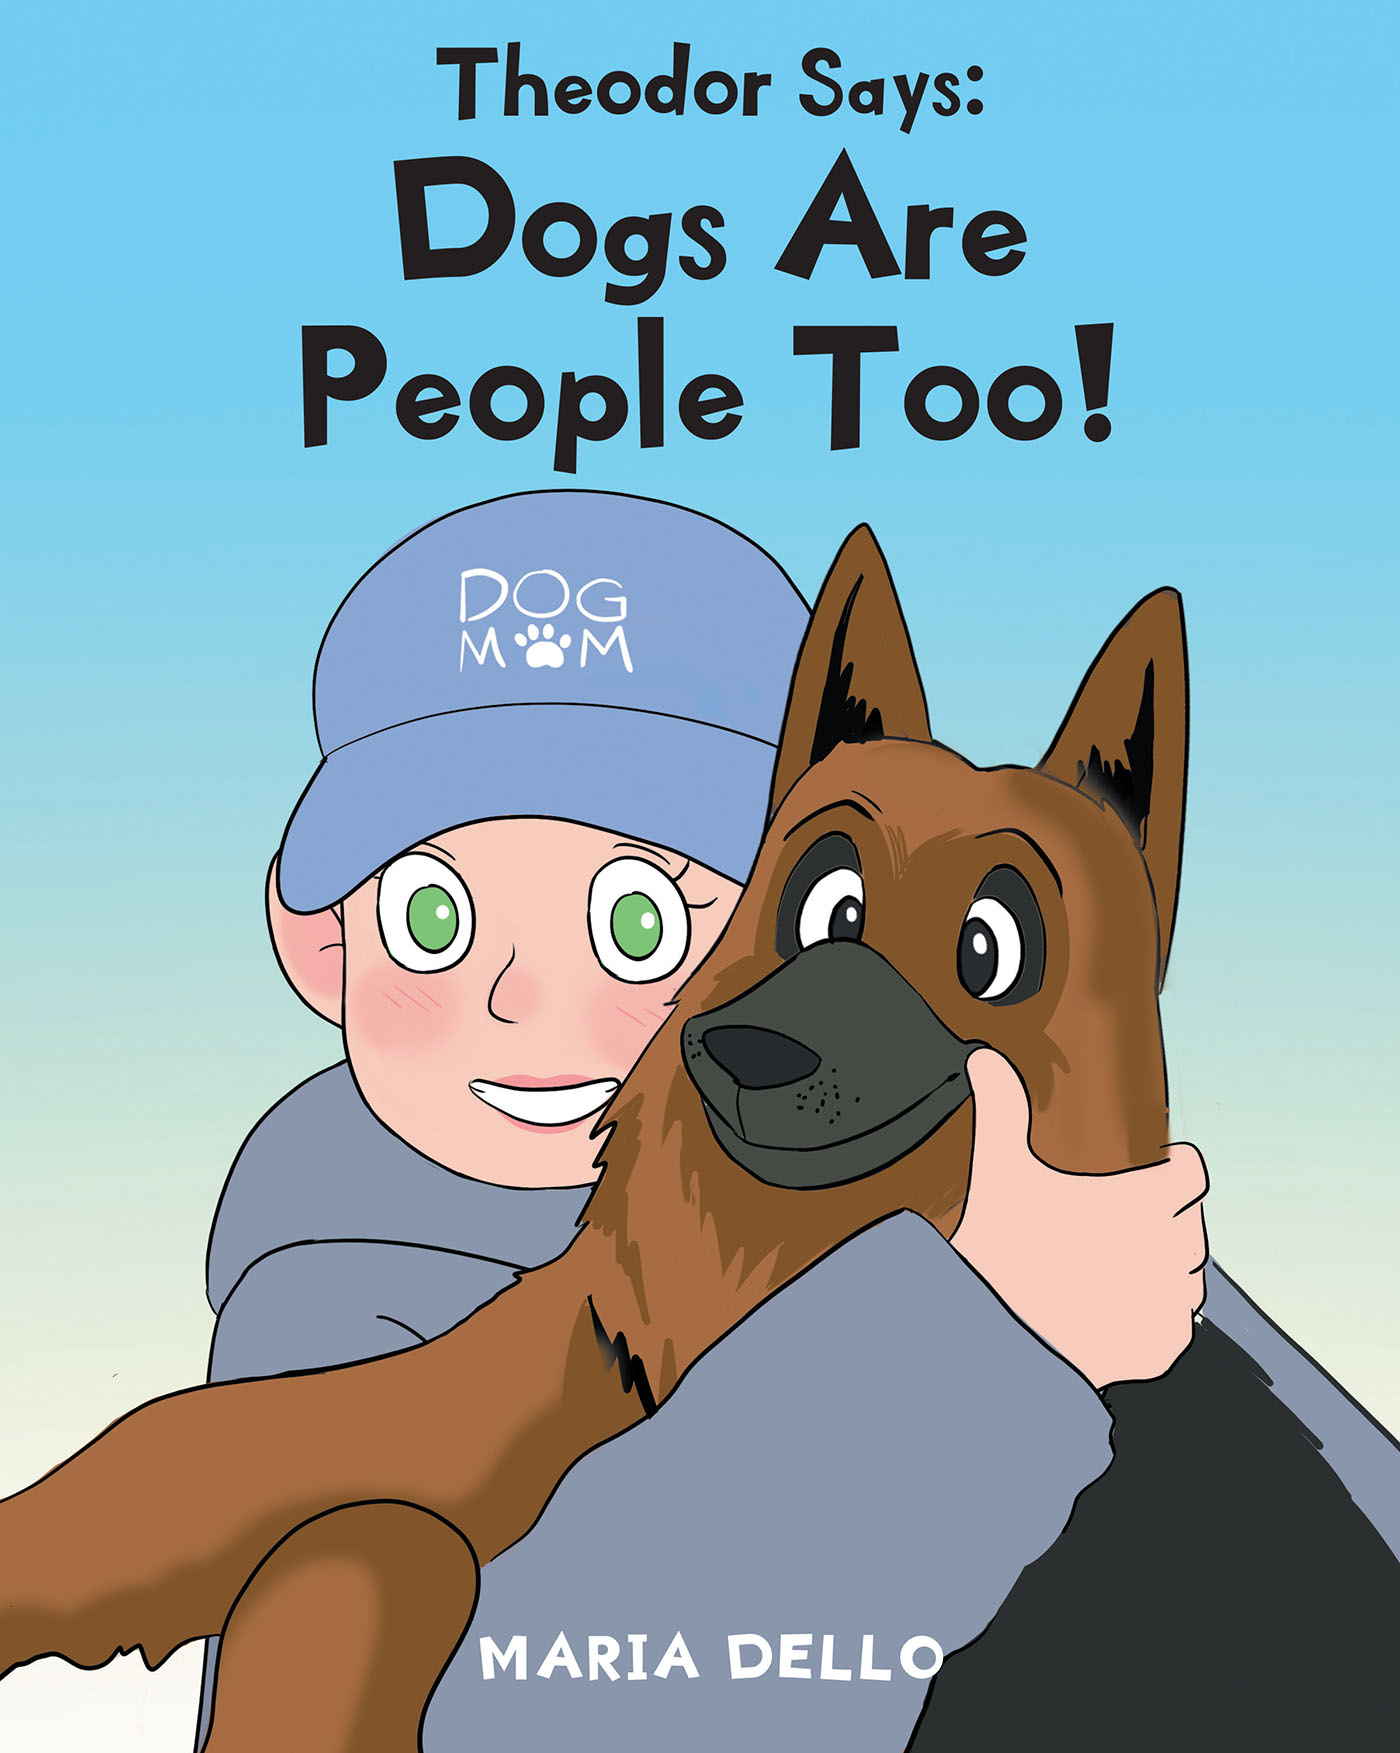 Maria Dello’s New Book, "Theodor Says: Dogs Are People Too!" is an Adorable Story Exploring the Ways in Which Dogs Have Feelings and Needs That Make Them Just Like People